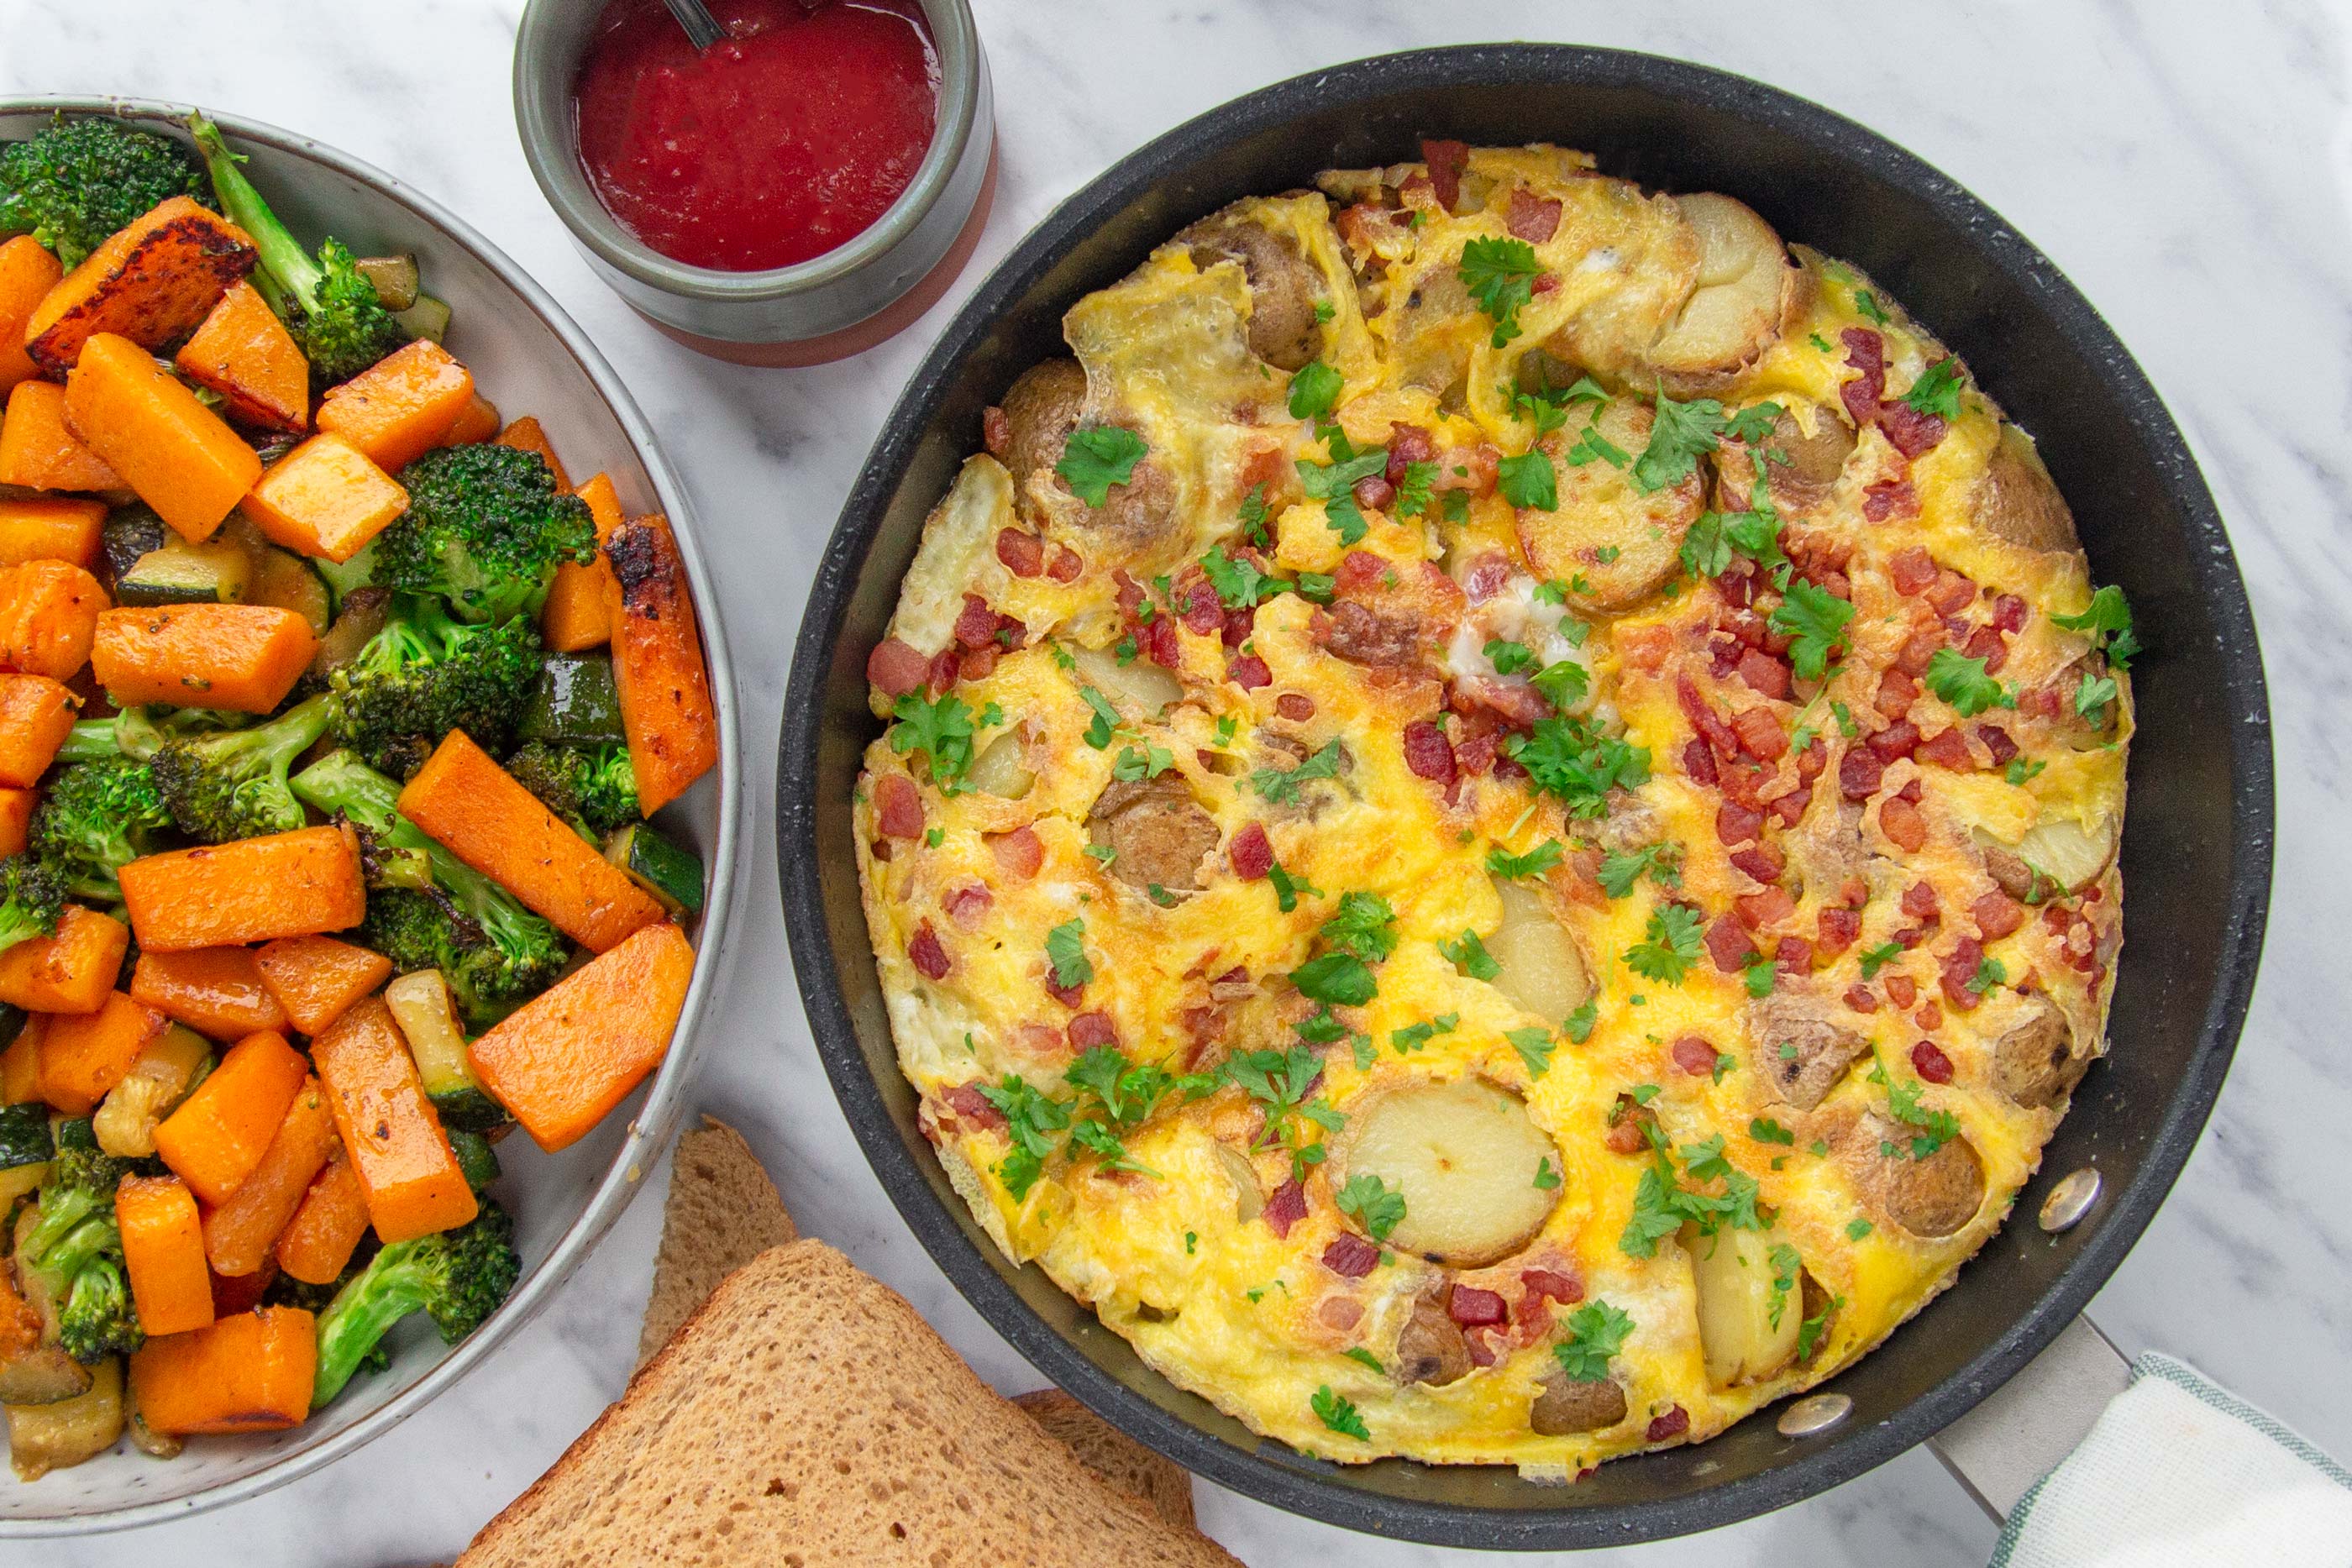 Spanish omelette with bacon, potatoes and pan fried veggies